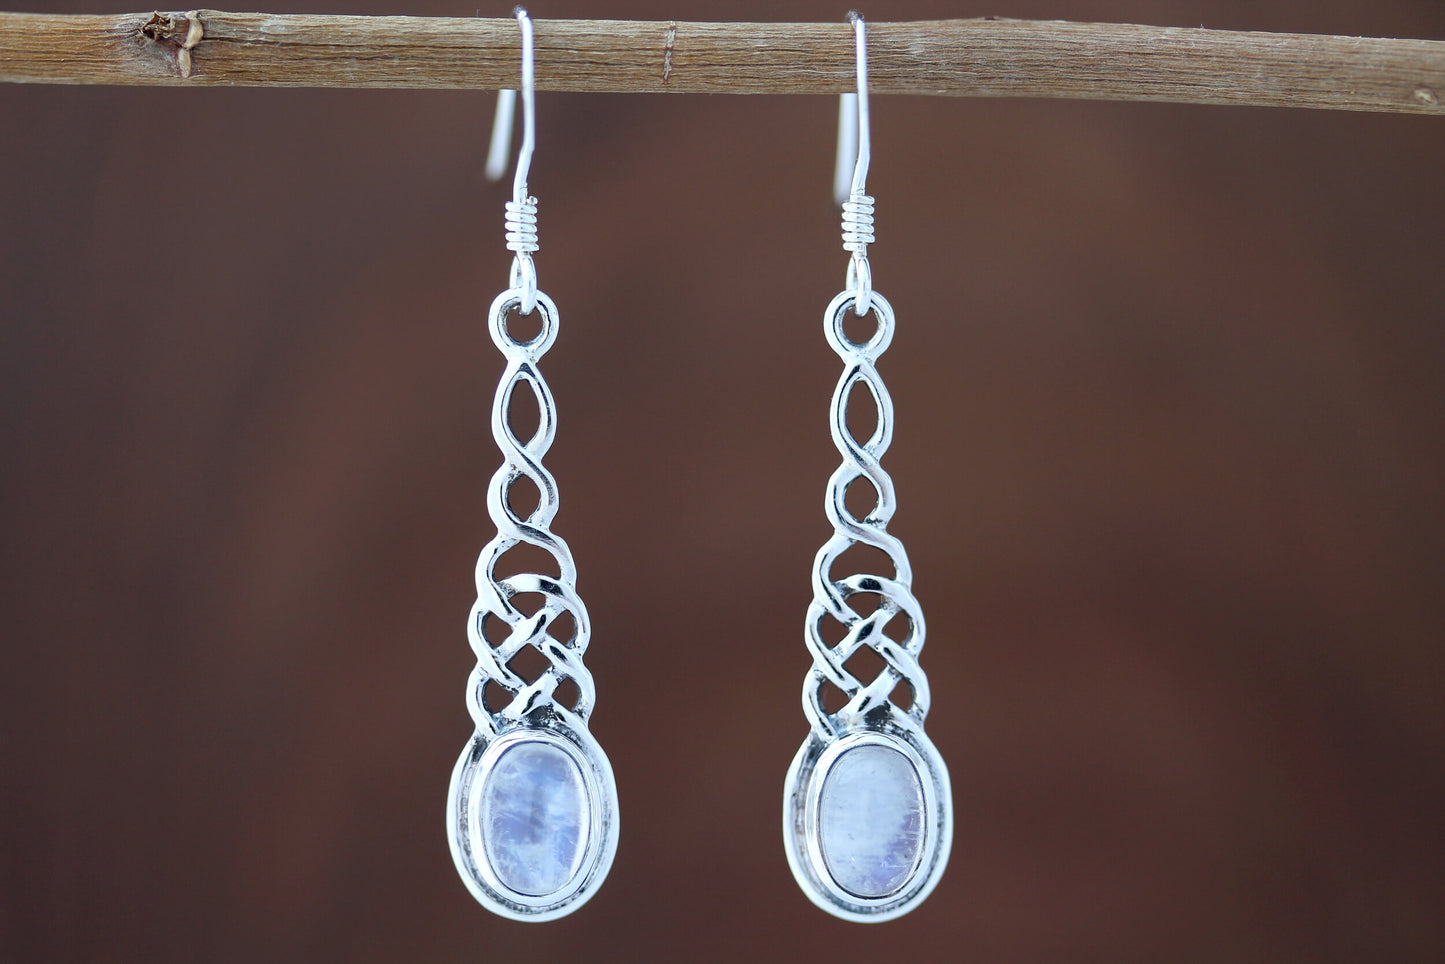 Celtic Knot Earrings - Elongated Twist with Moonstone